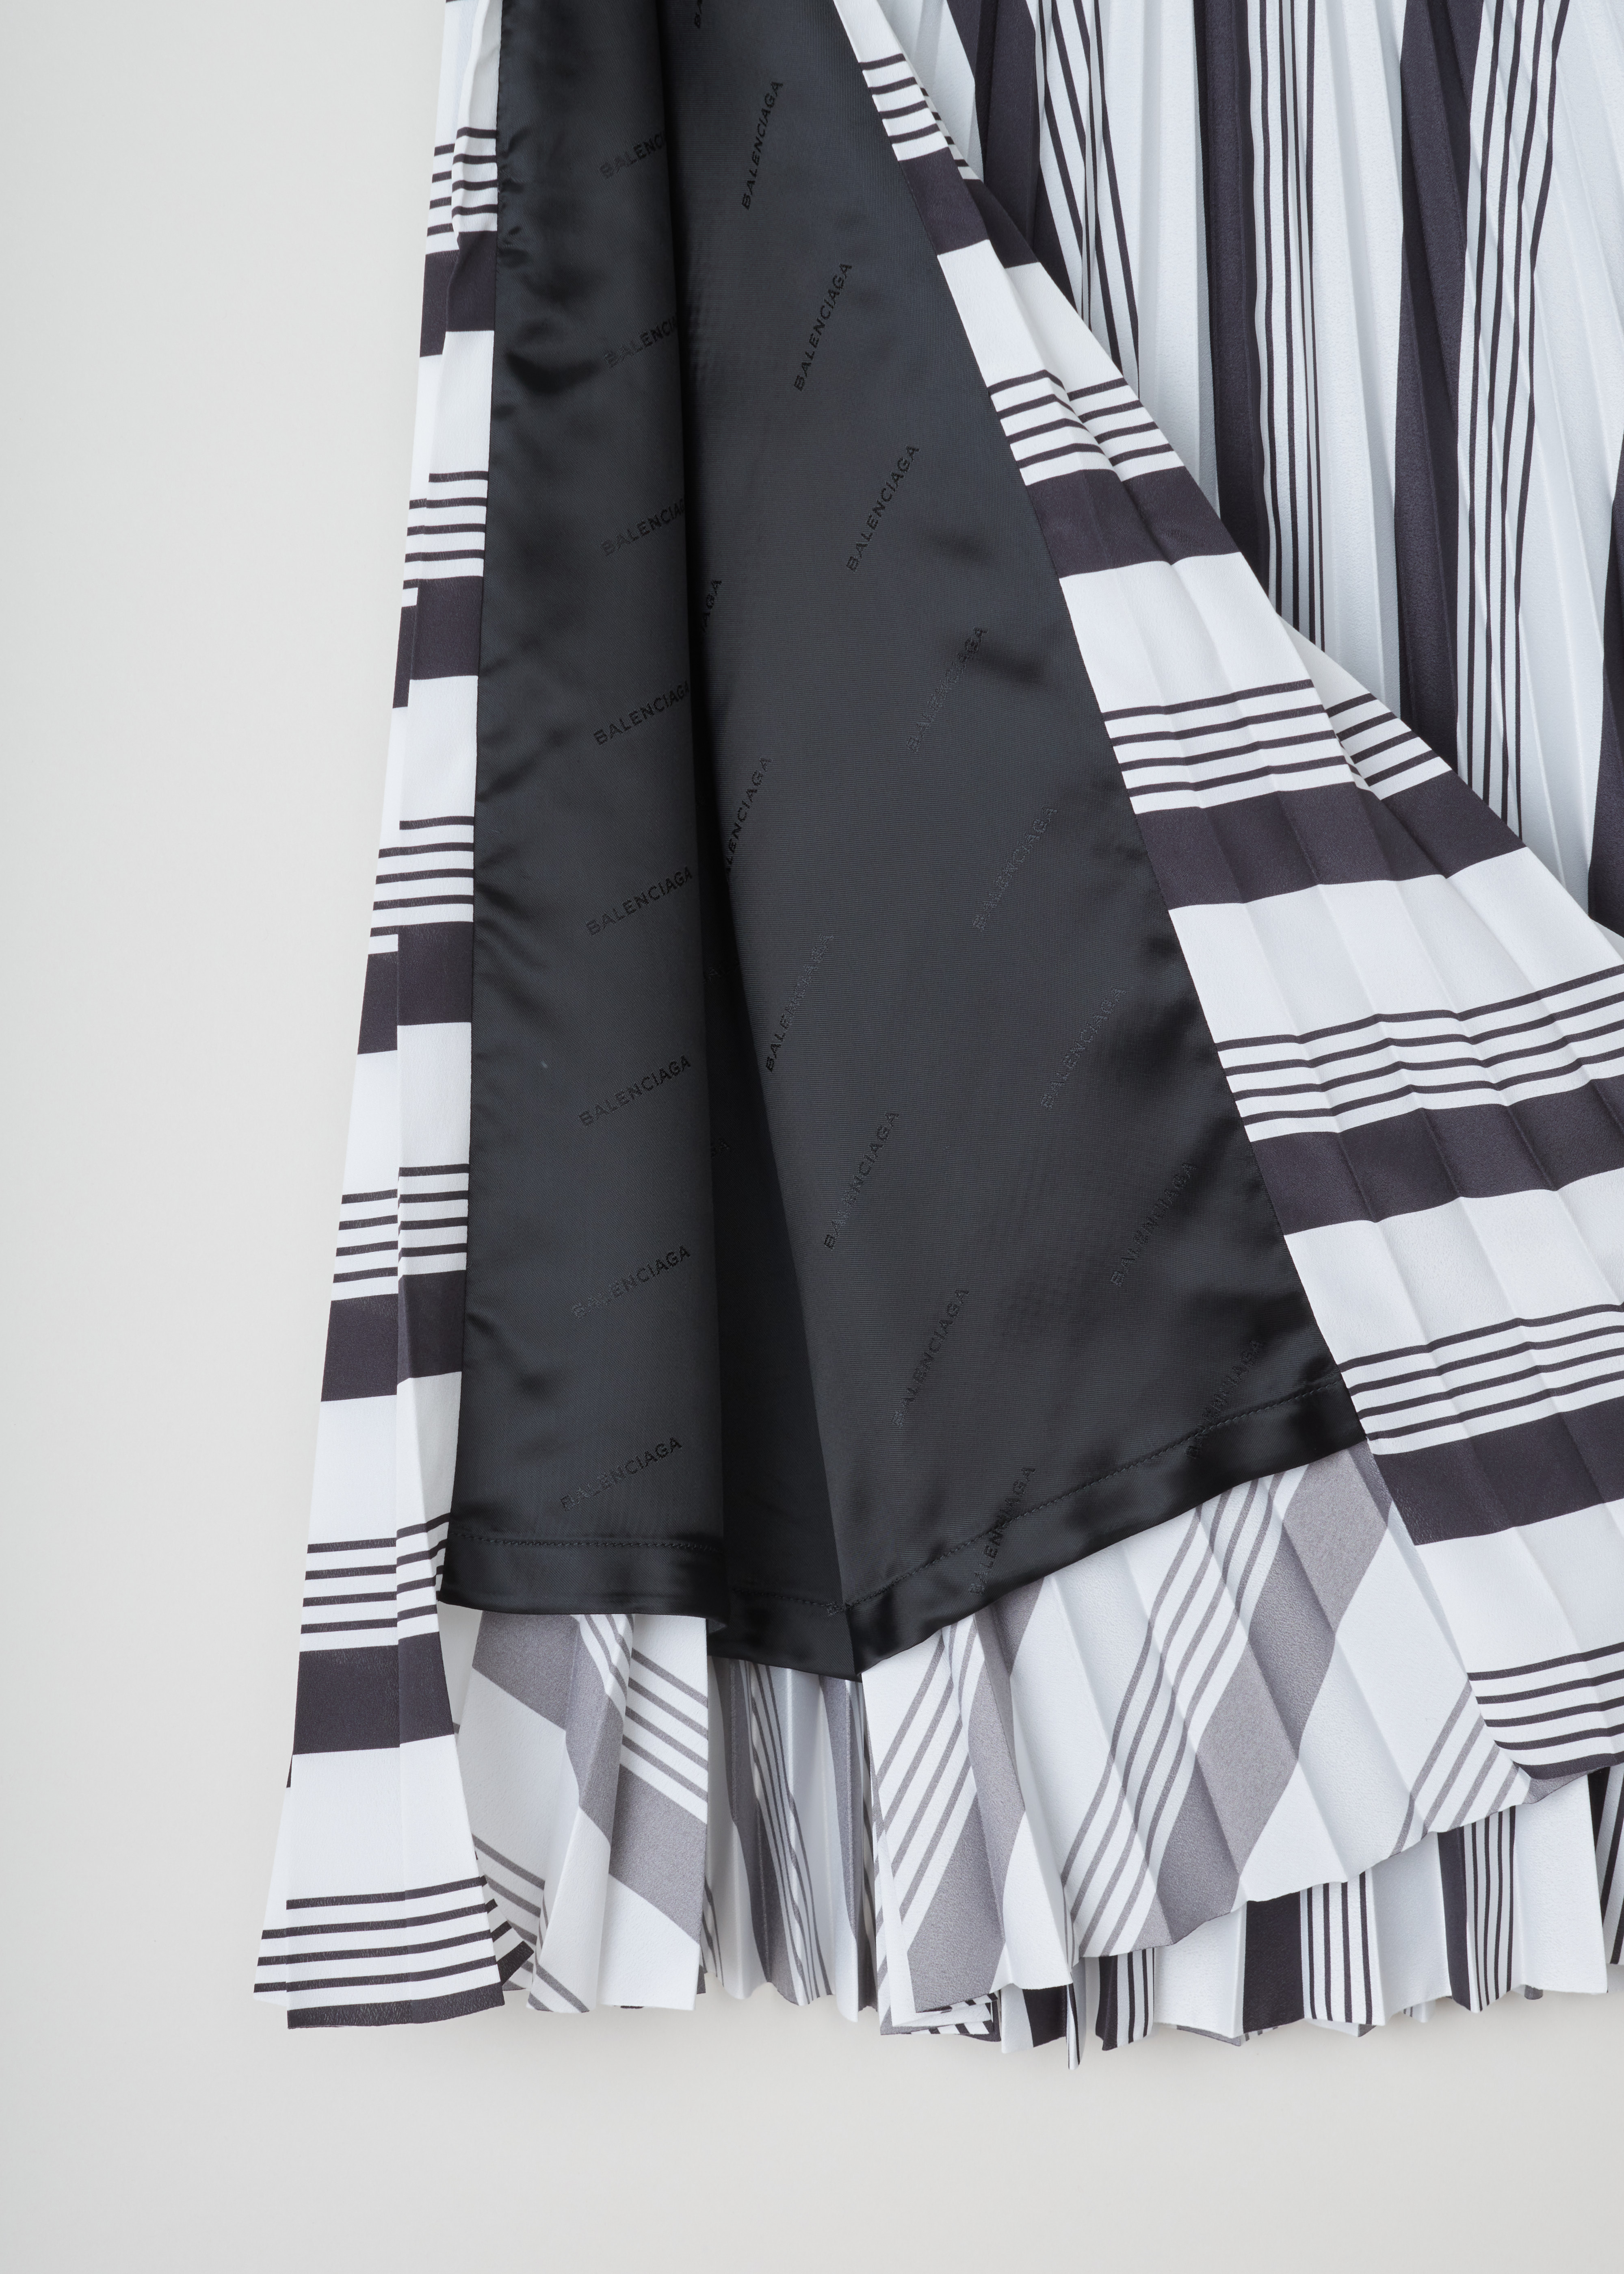 Balenciaga Striped pleated skirt 501971_TYA43_1070 noir blanc detail. White plissé skirt with curved black stripe pattern, small waistband with four belt hoops, invisible zipper and slit on the side.